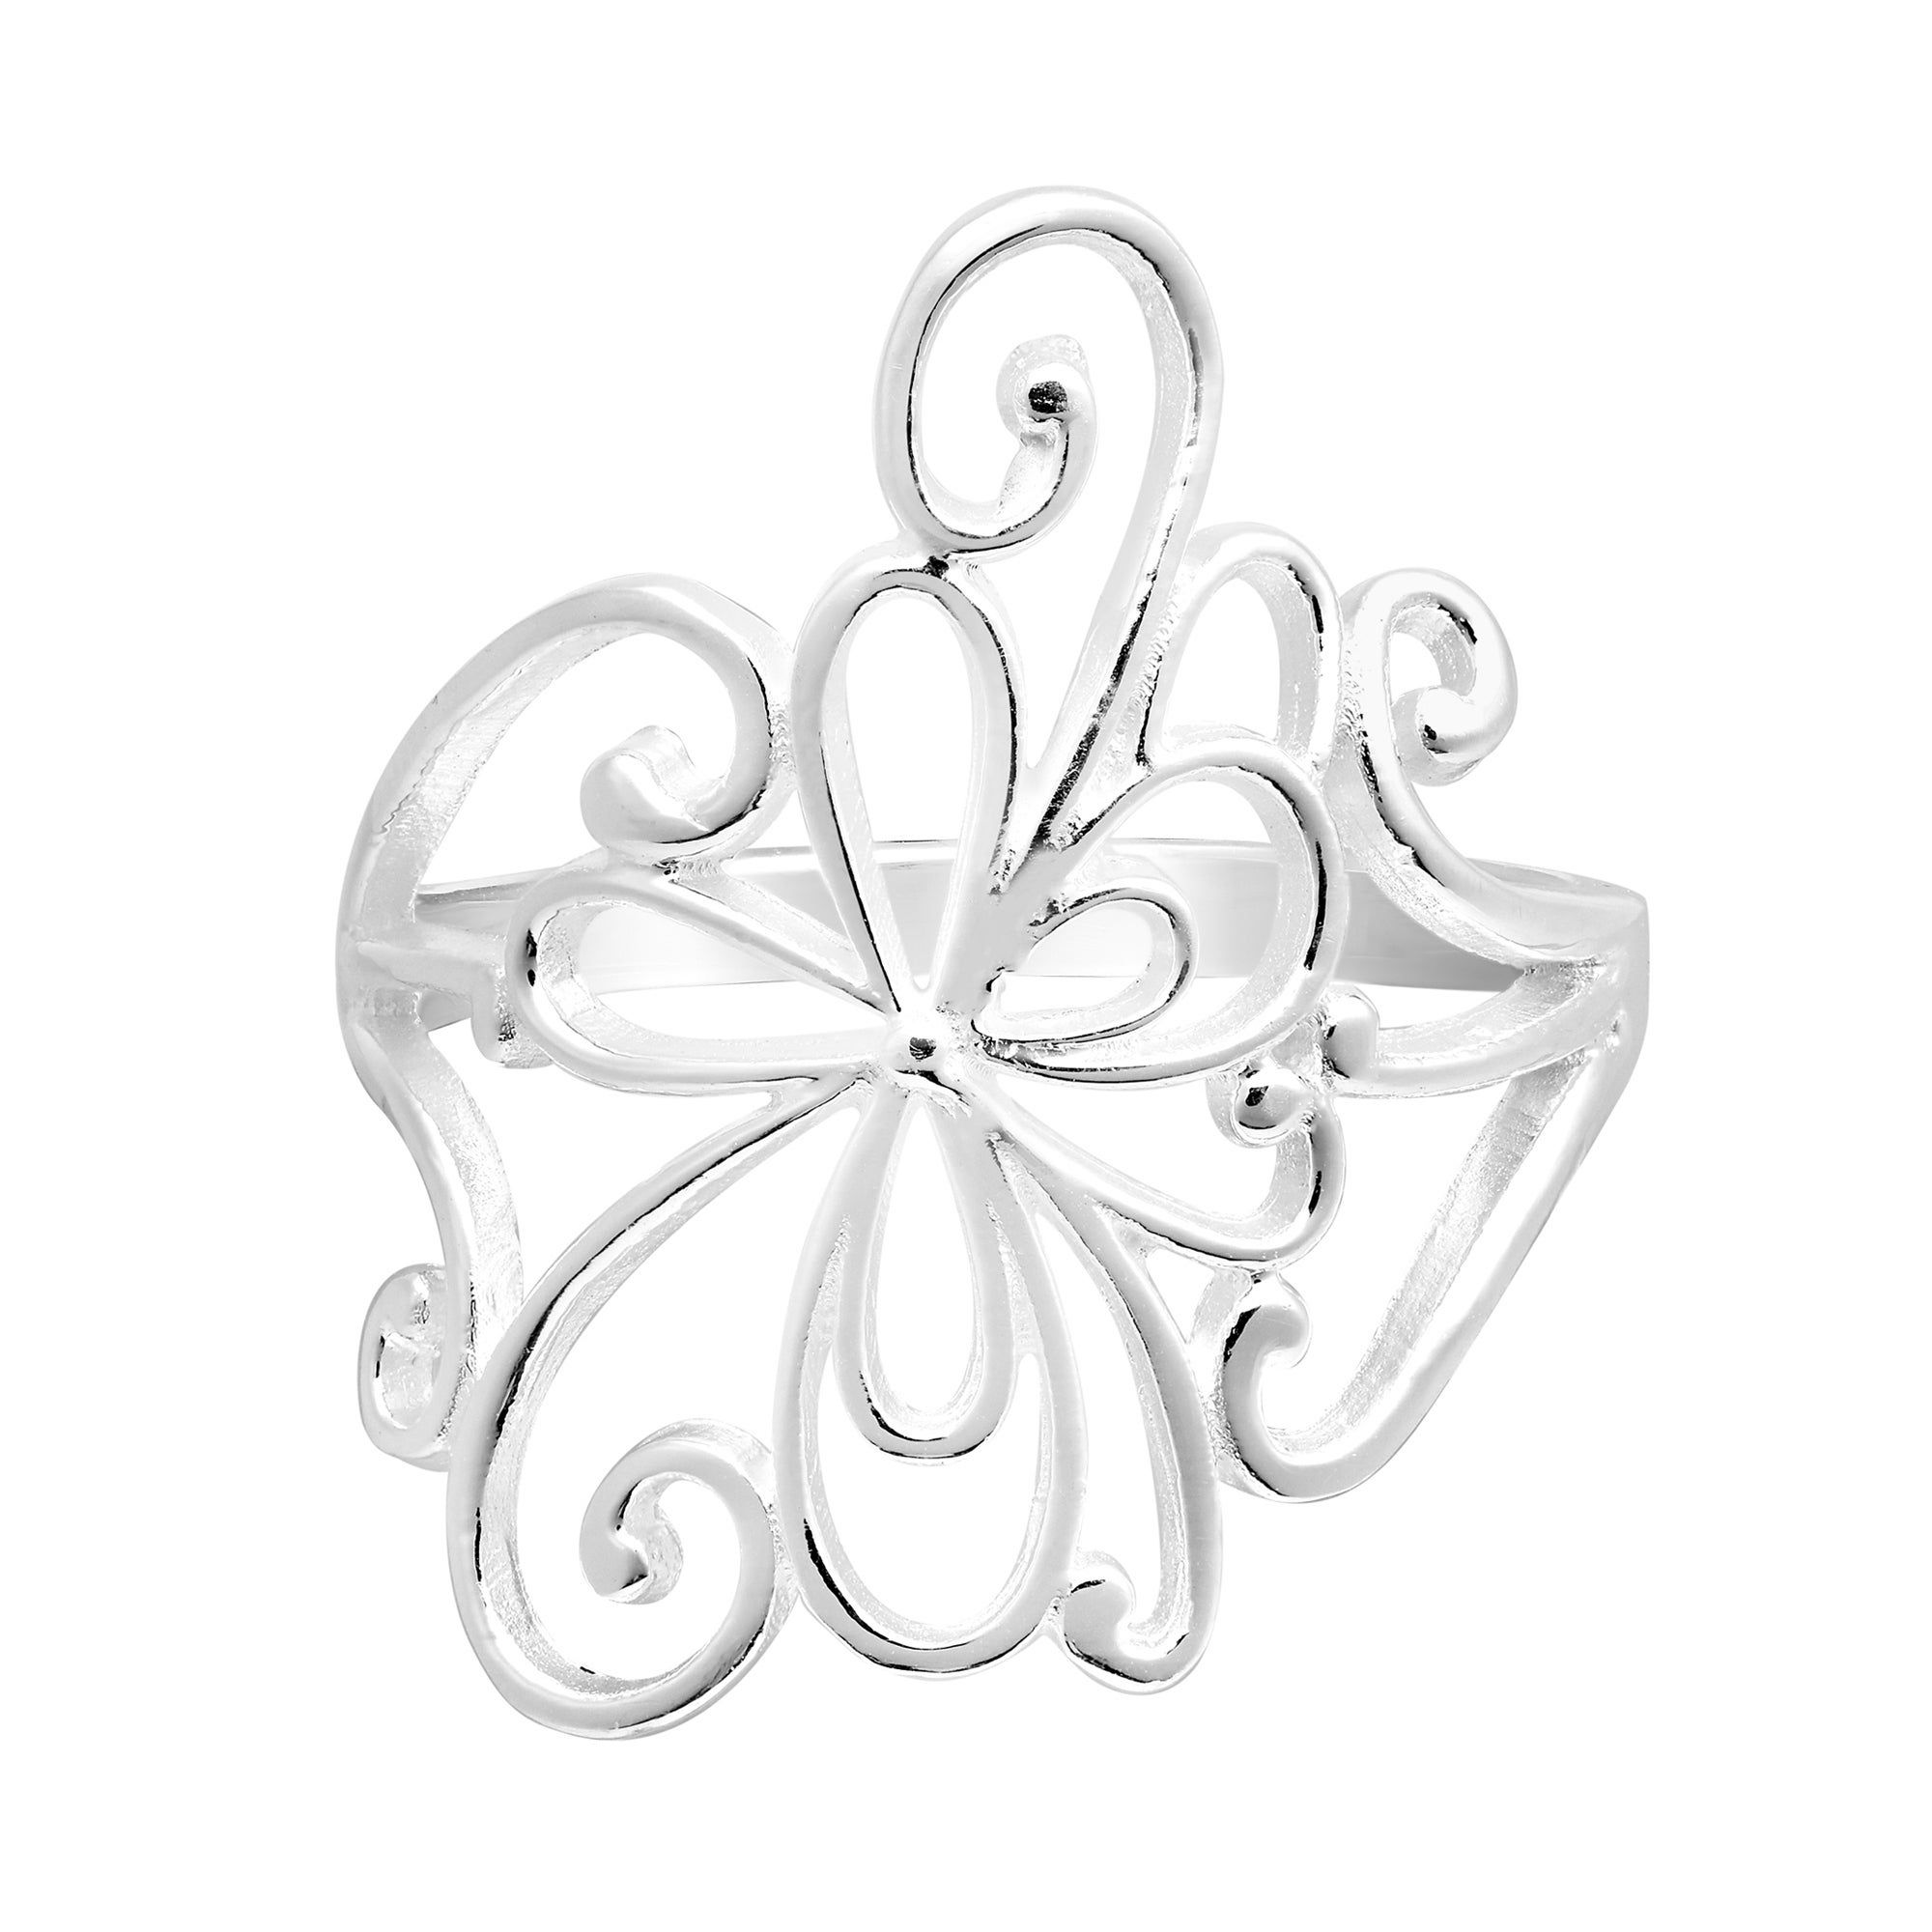 Handmade Delicate Swirling Flower Blossom Sterling Silver Ring (thailand) For Most Recent Swirling Lines Rings (View 19 of 25)